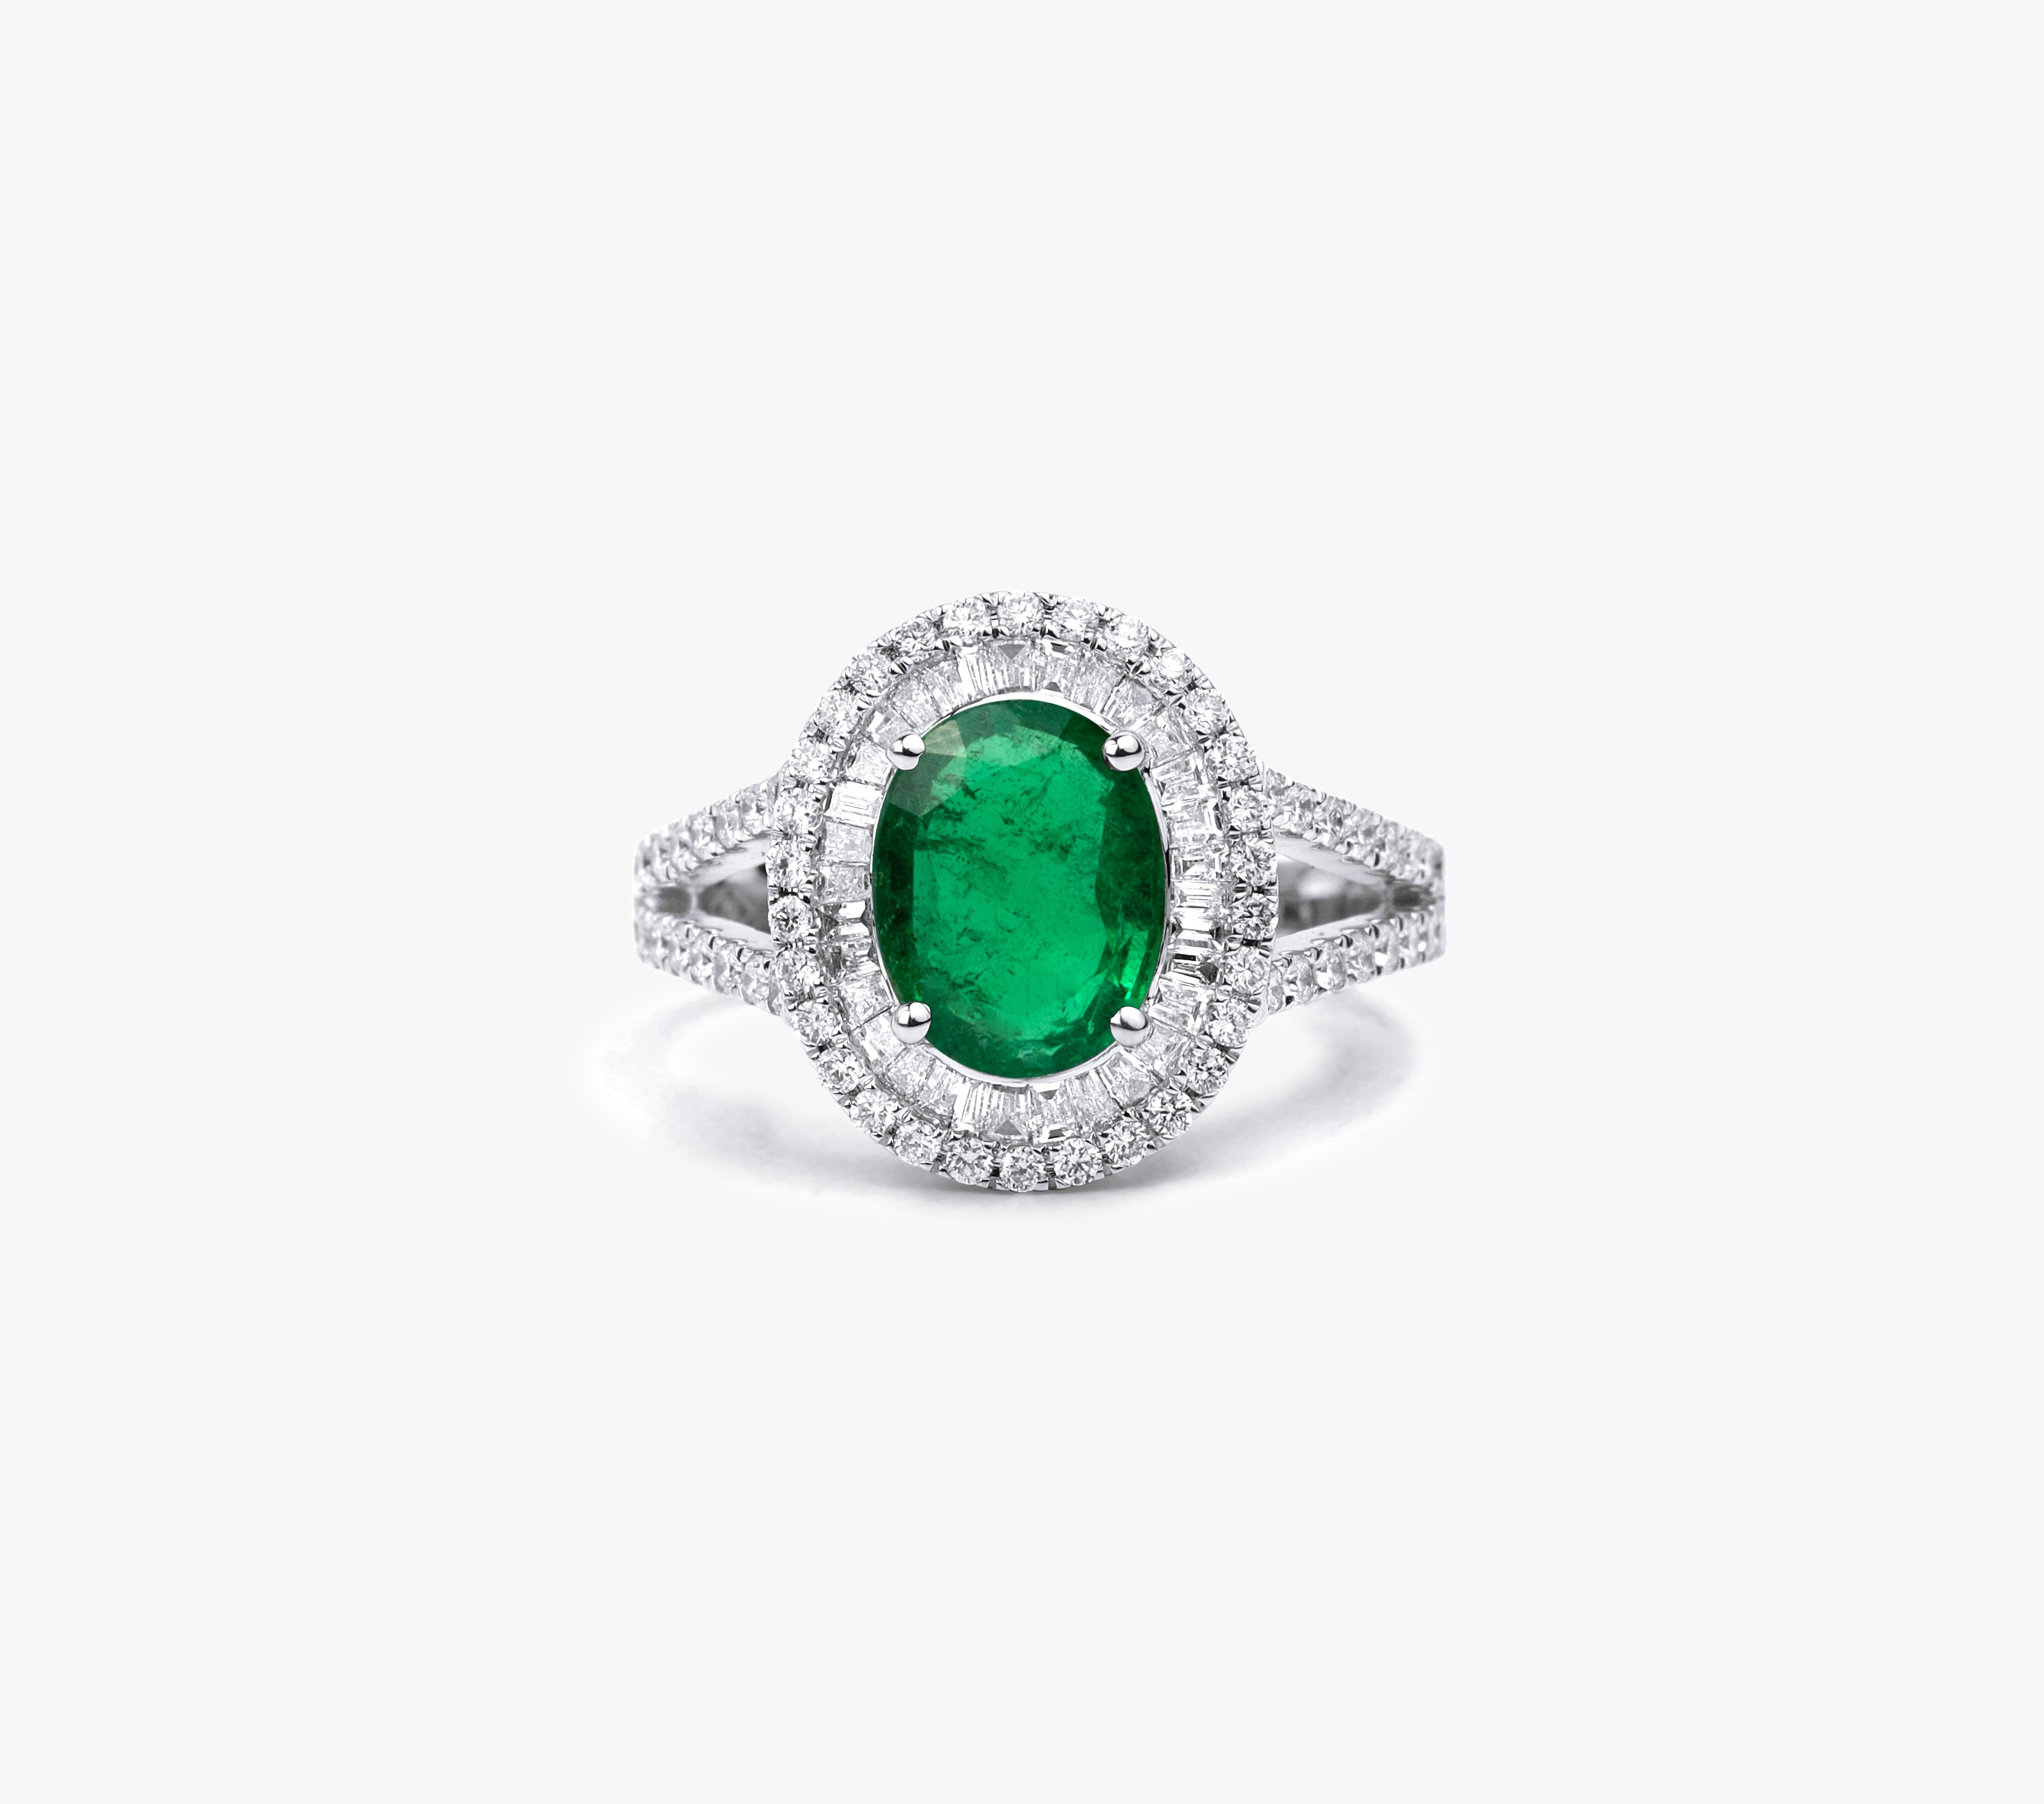 Oval Natural Emerald Diamond Double Halo Cocktail Engagement Ring 18k White Gold

Available in 18k white gold.

Same design can be made also with other custom gemstones per request.

Product details:

- Solid gold

- Diamond - approx. 0.83 carat

-